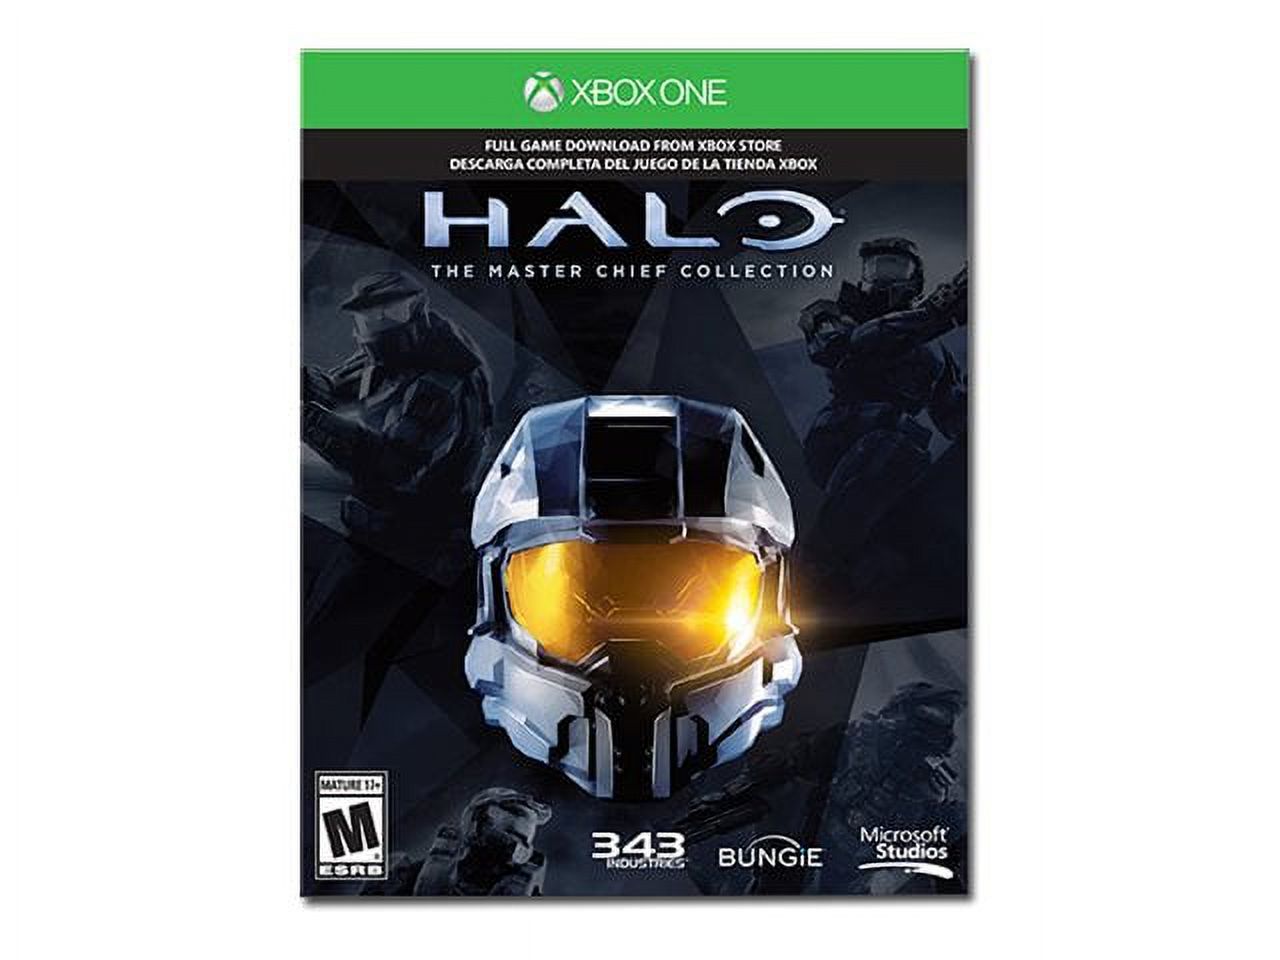 Microsoft Xbox One - Halo: The Master Chief Collection Bundle - game  console - 500 GB HDD - black 